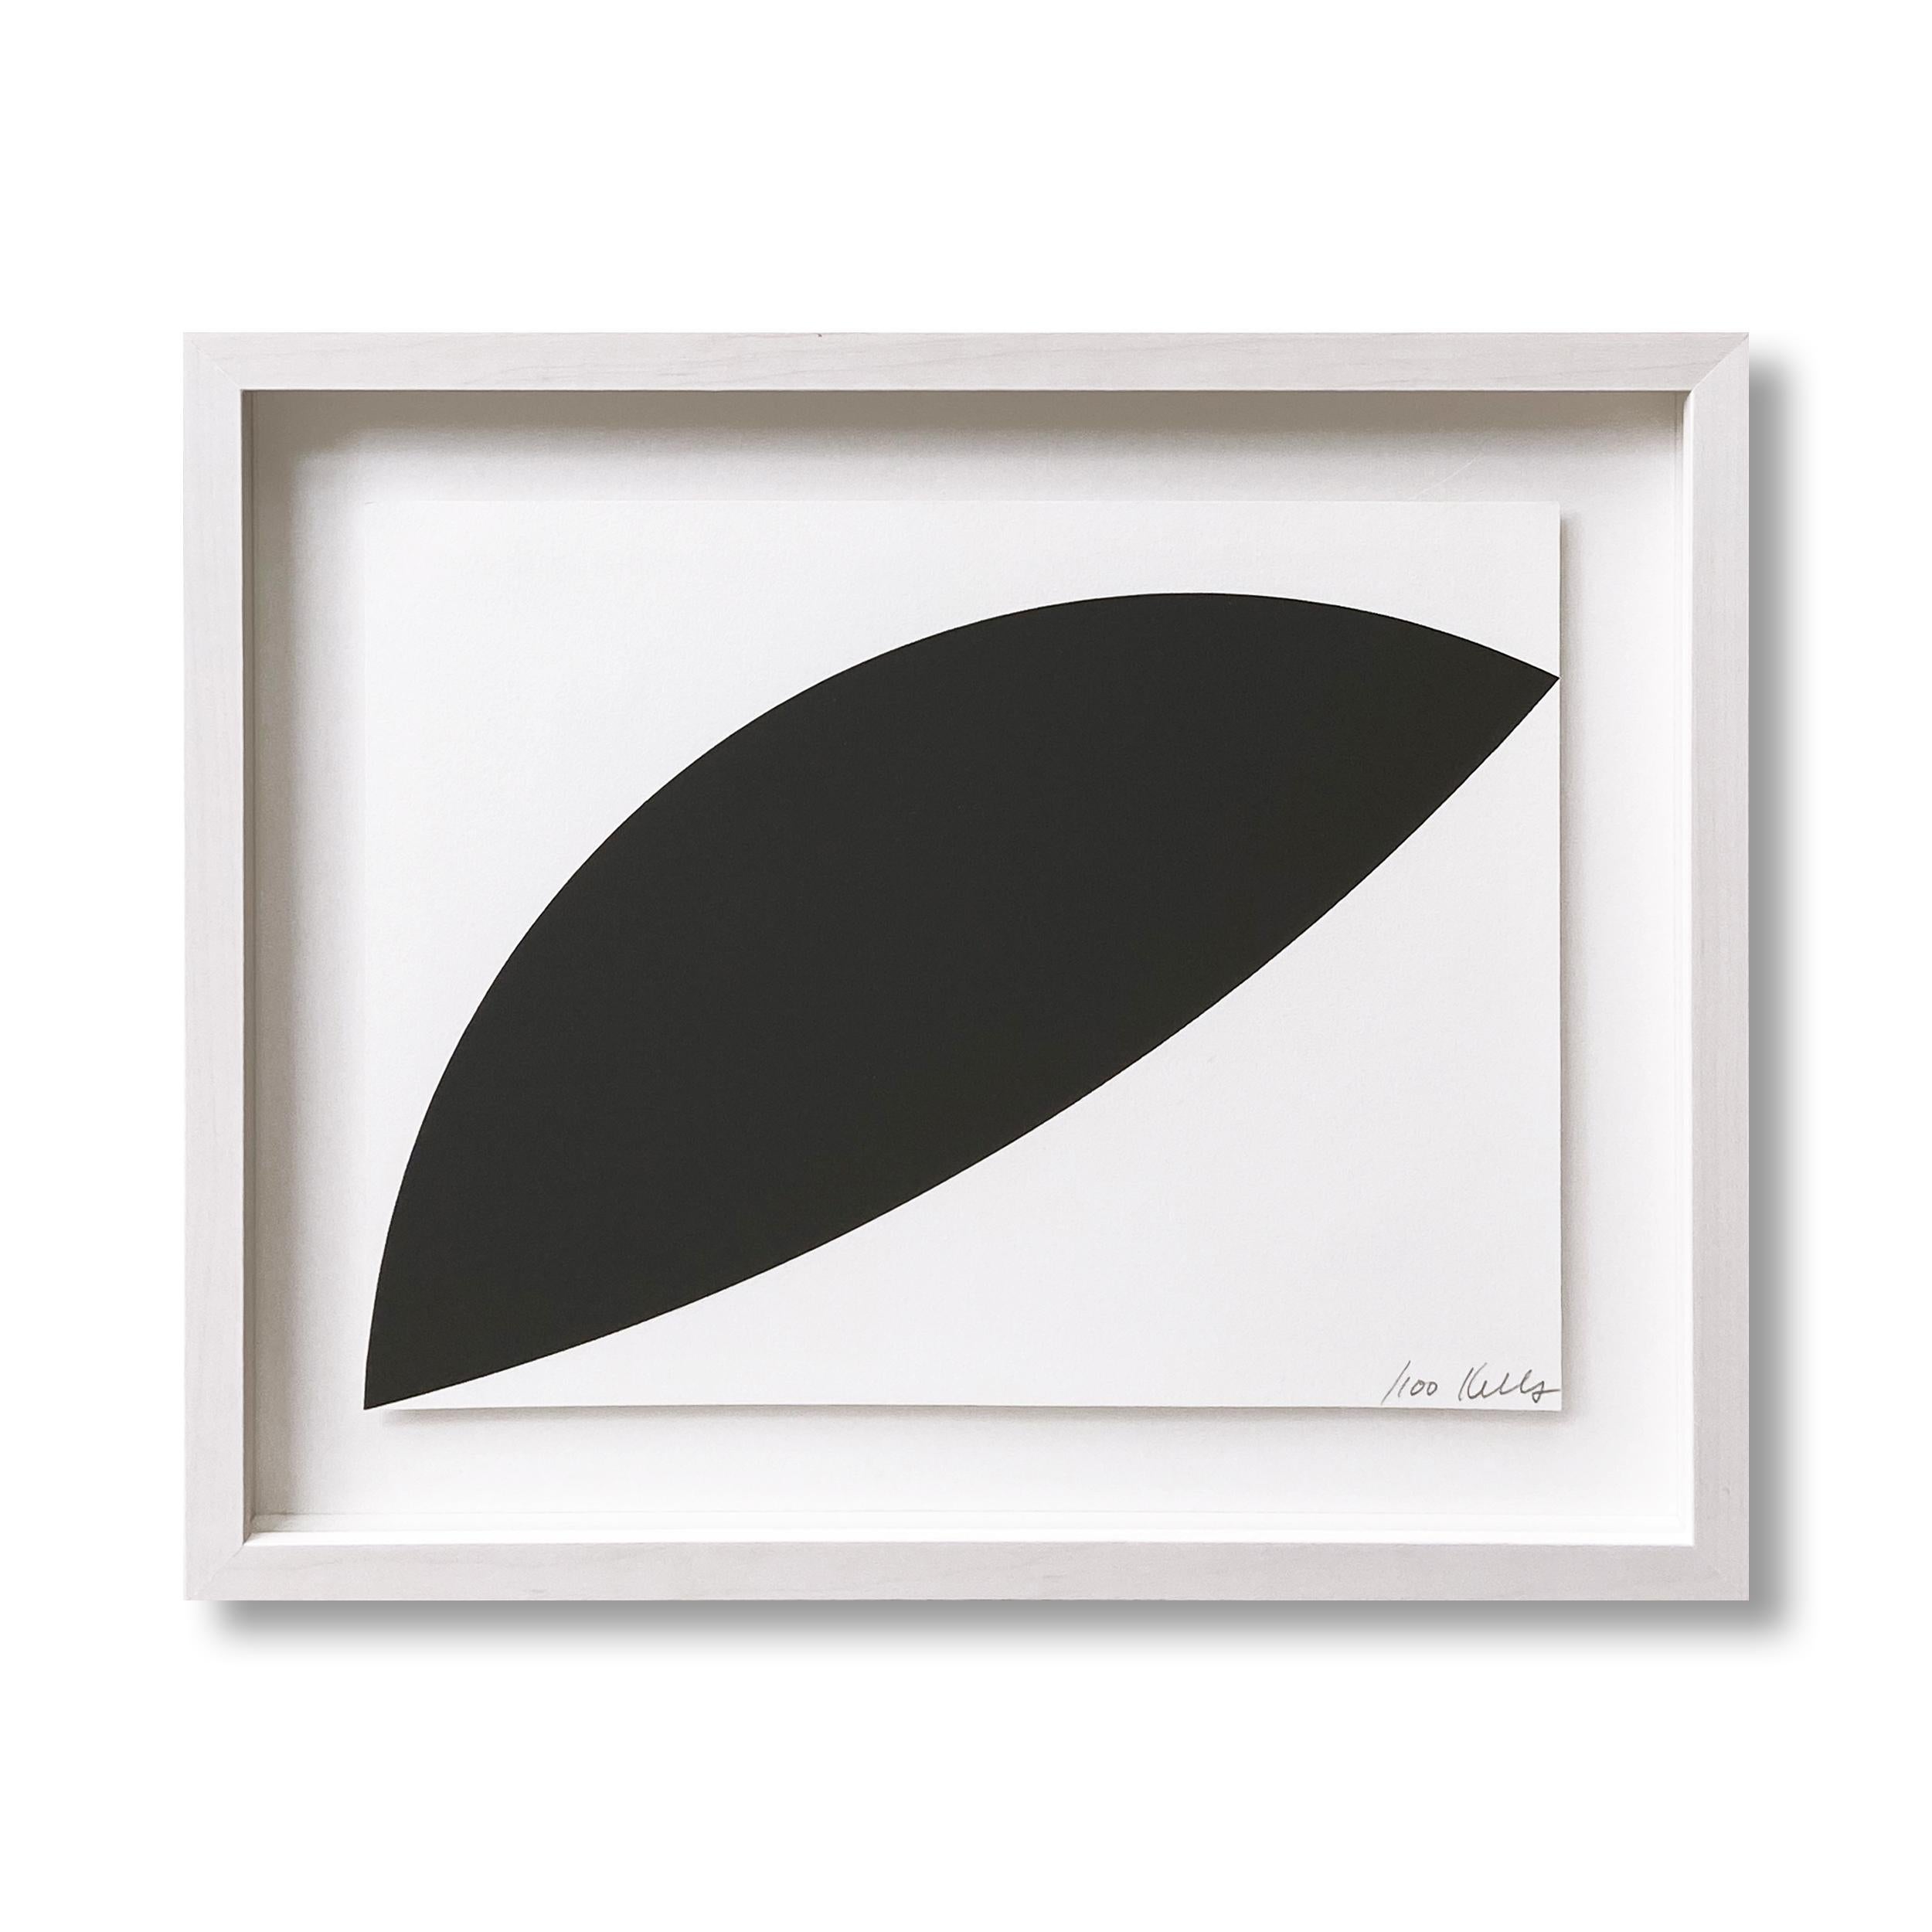 Ellsworth Kelly, Two Curves, Signed lithograph, Abstract Art, Minimalism